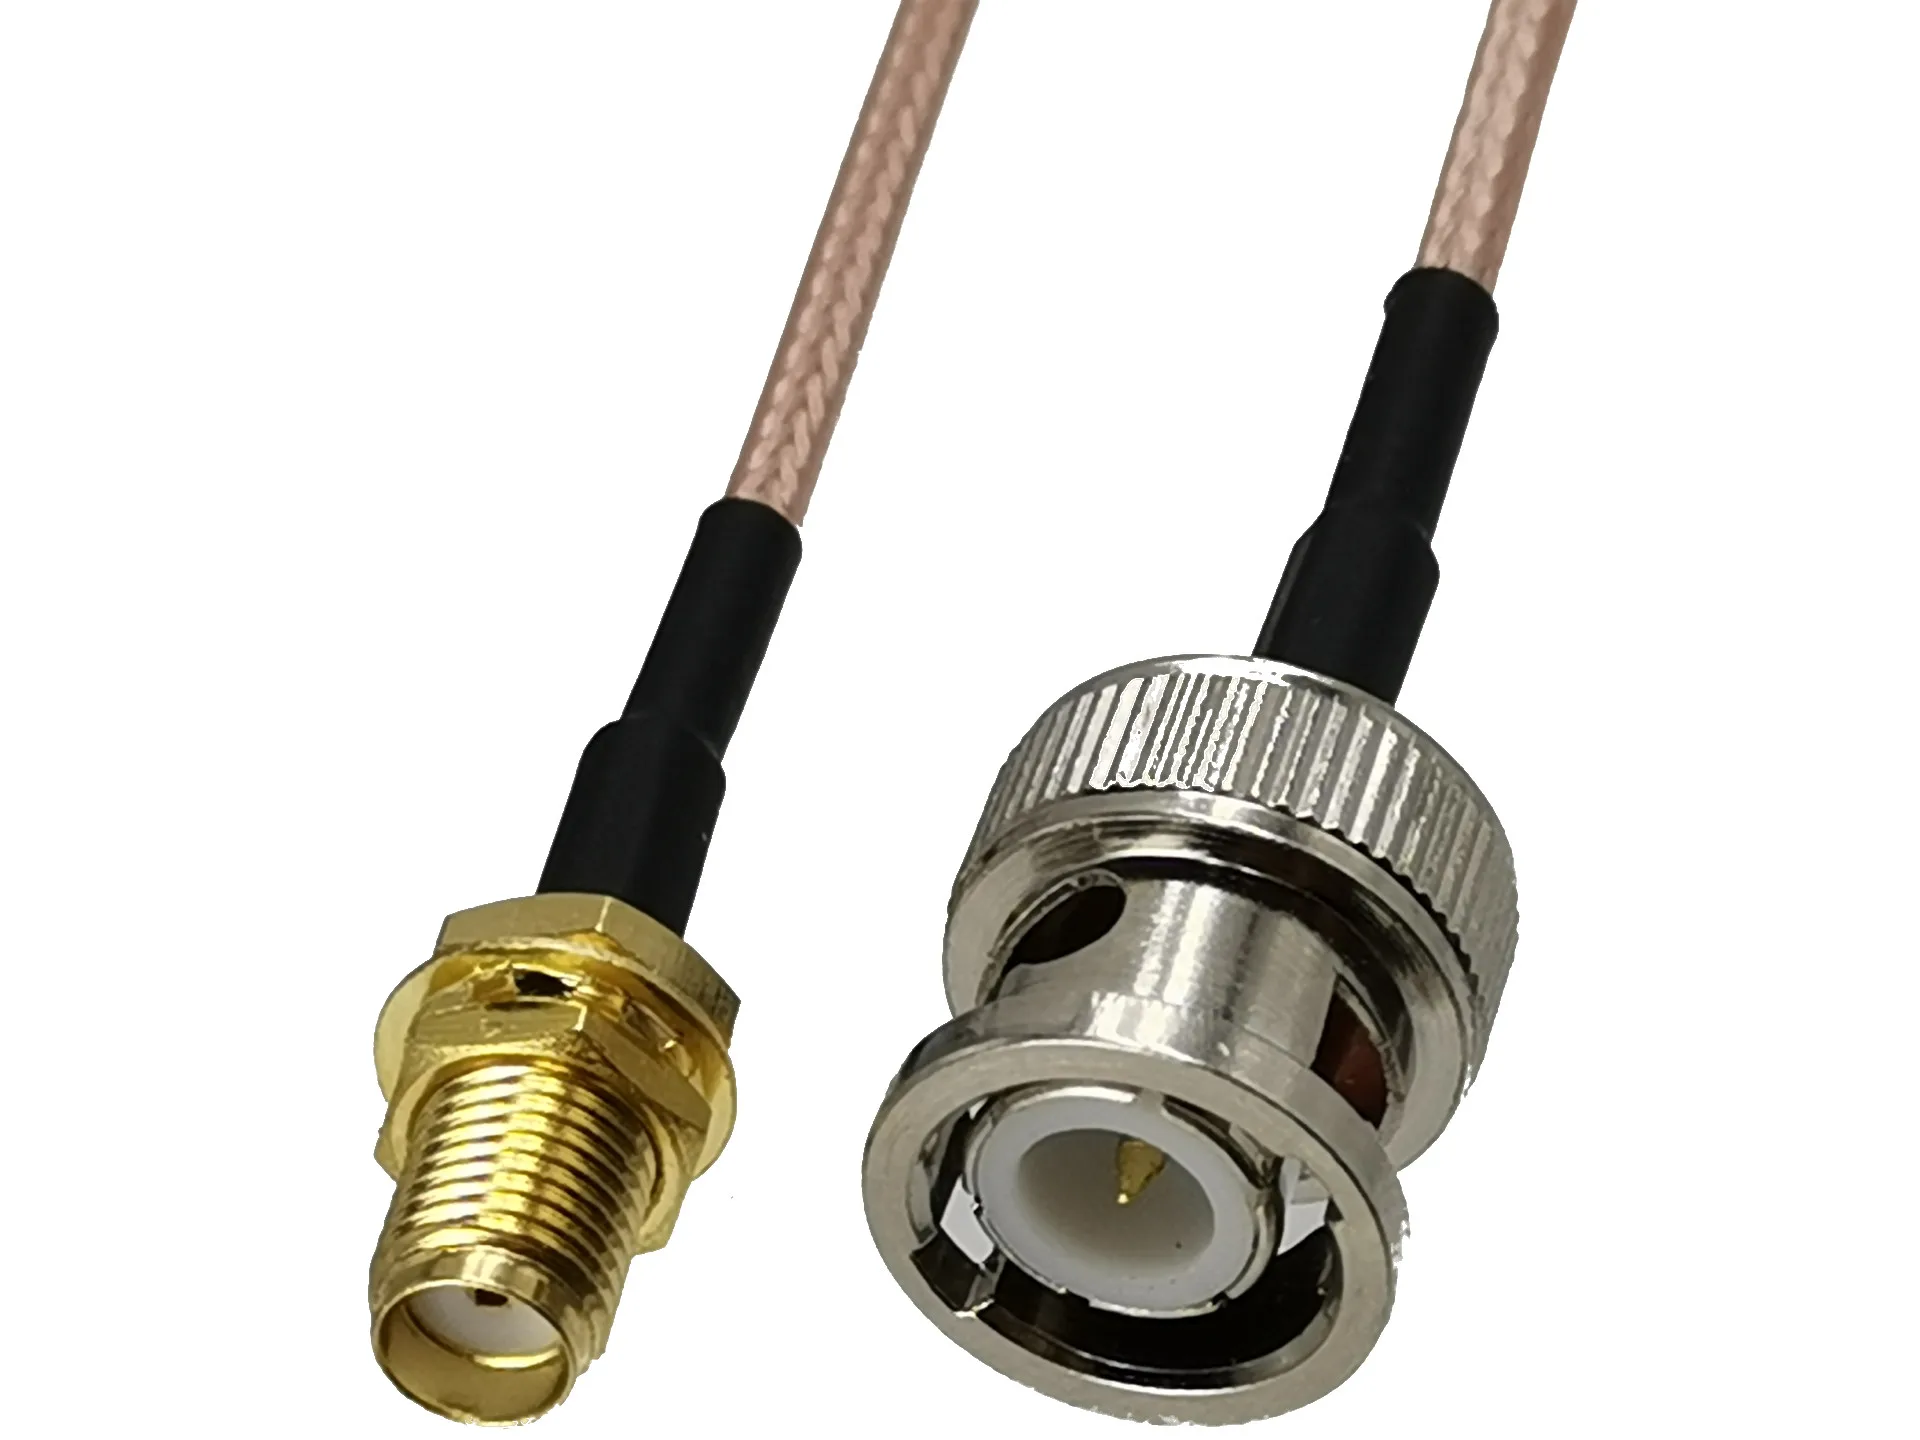 

1pcs RG316 BNC Male Plug to SMA Female Jack Bulkhead Nut RF Coaxial Connector Pigtail Jumper Cable Straight New 4inch~5M